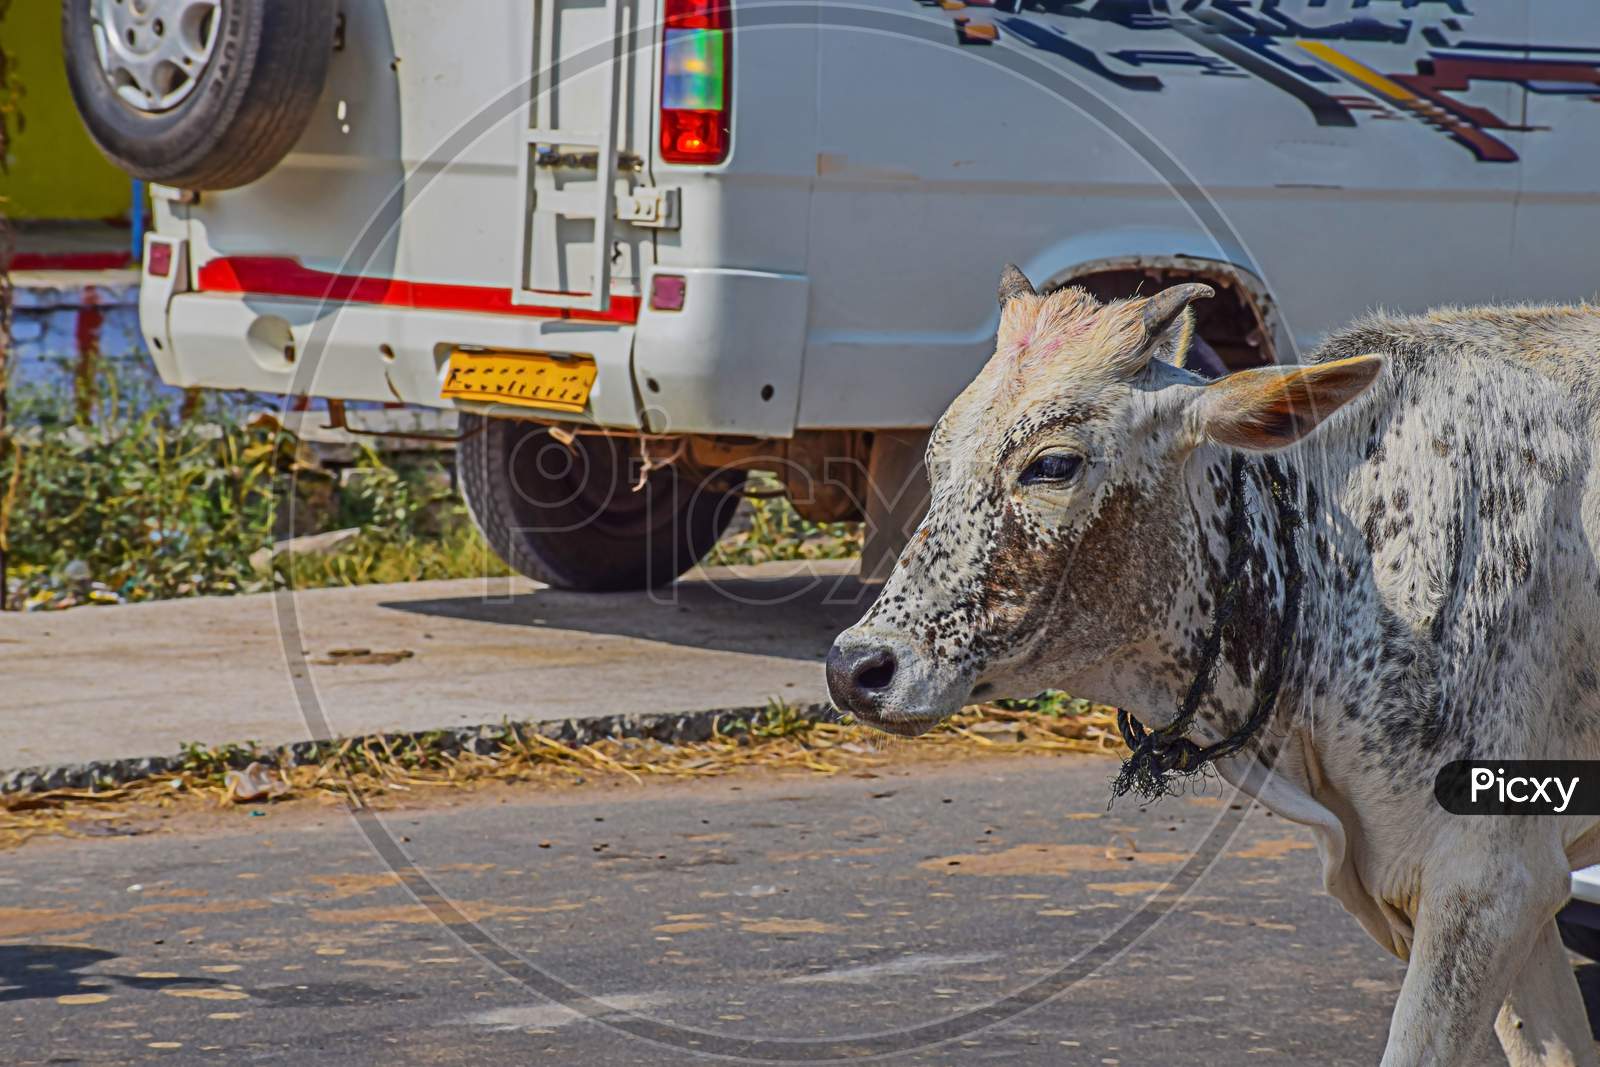 Picture Of A White Color Indian Calf Walking On Road In Bright Sunlight.